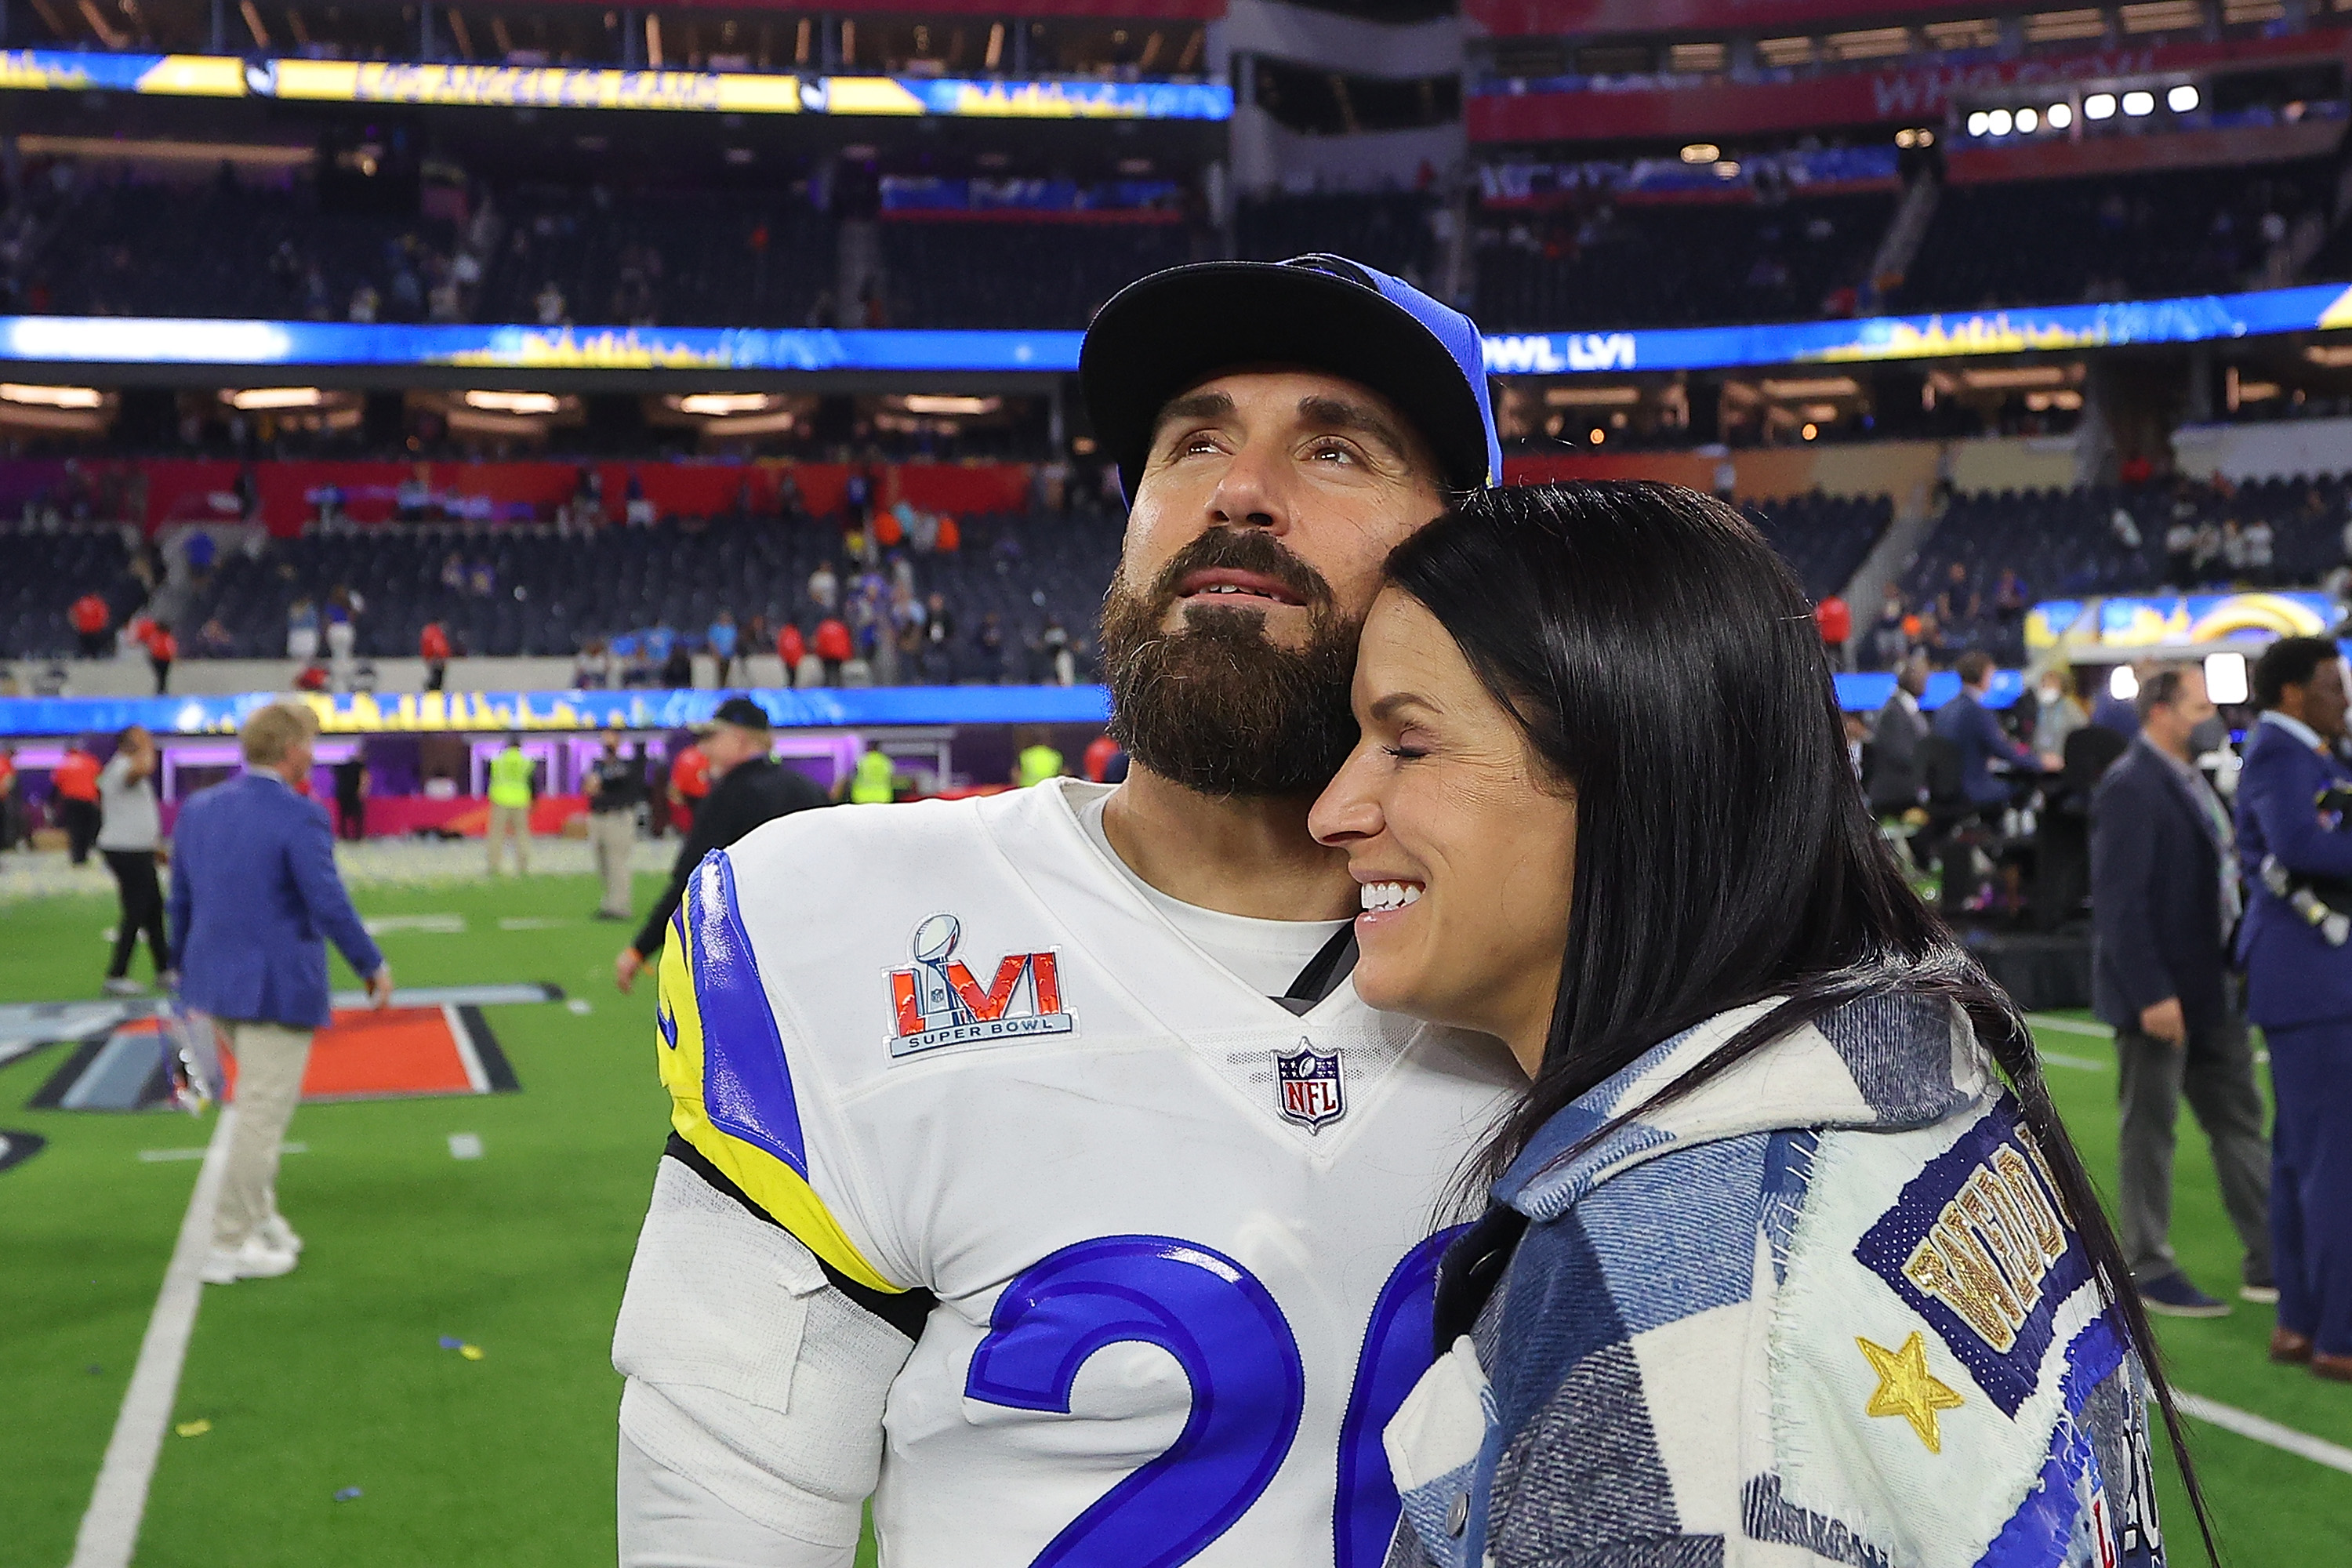 Rams safety Eric Weddle reacts after winning Super Bowl 56